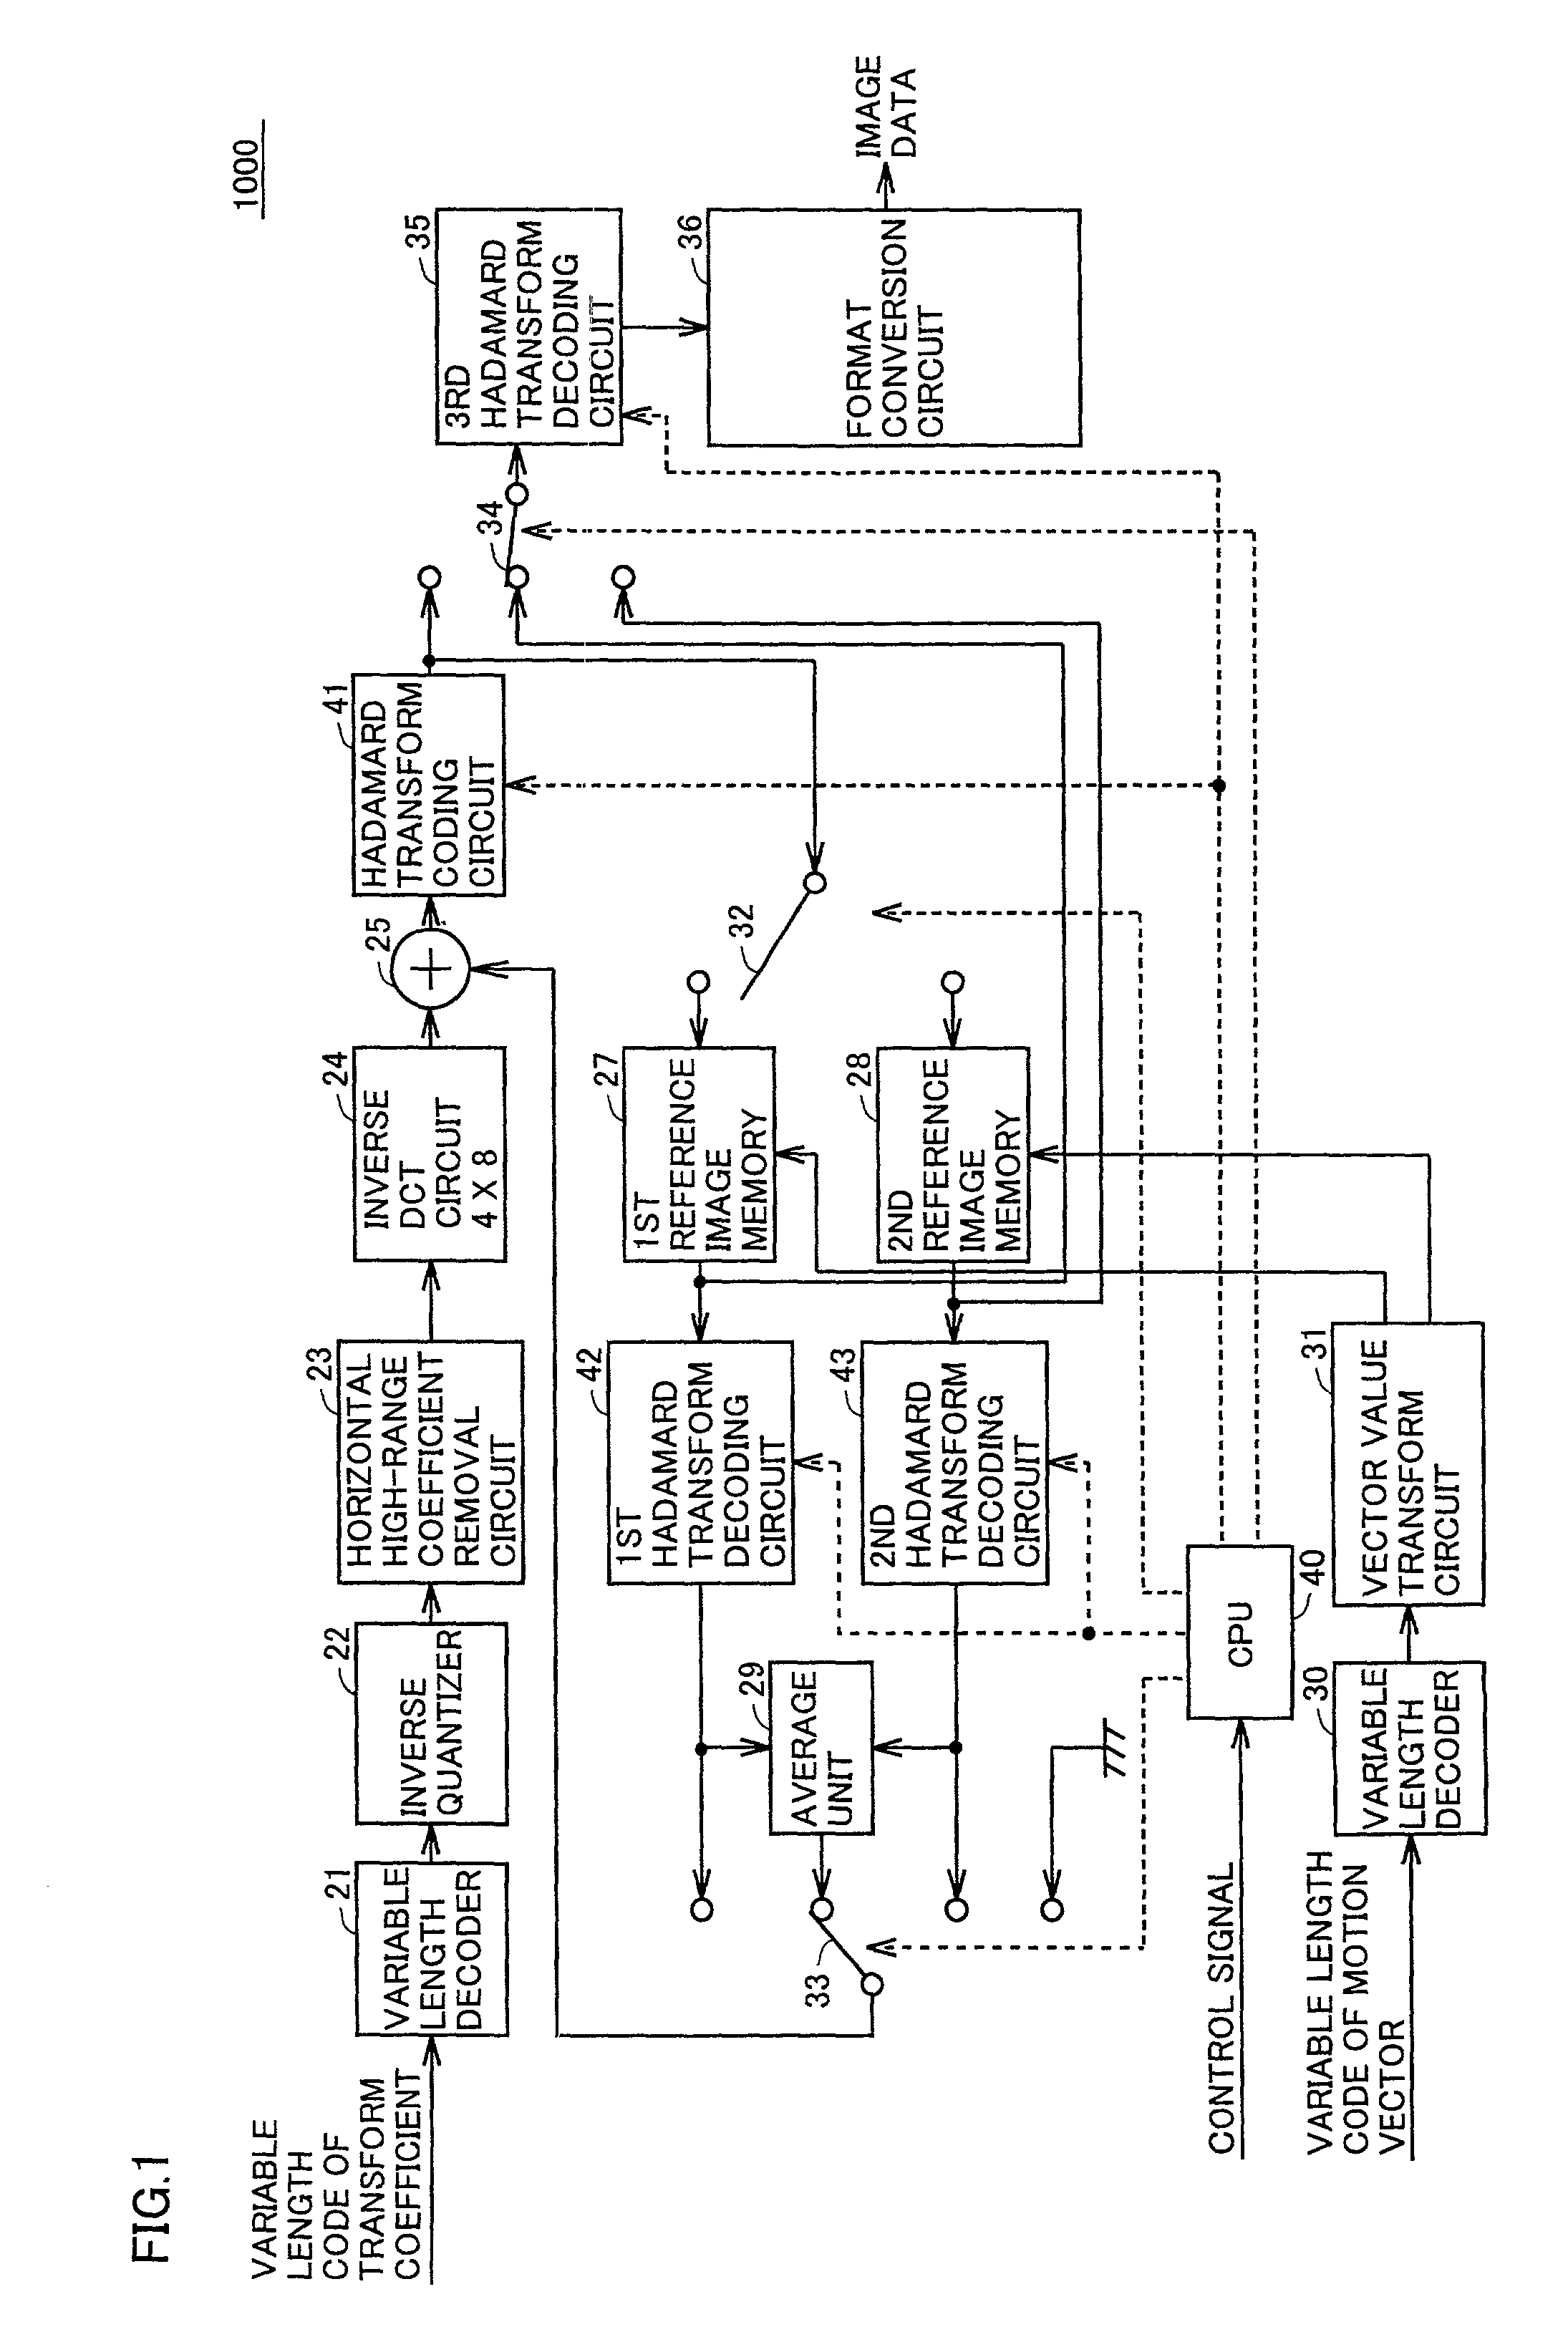 Motion image decoding apparatus and method reducing error accumulation and hence image degradation